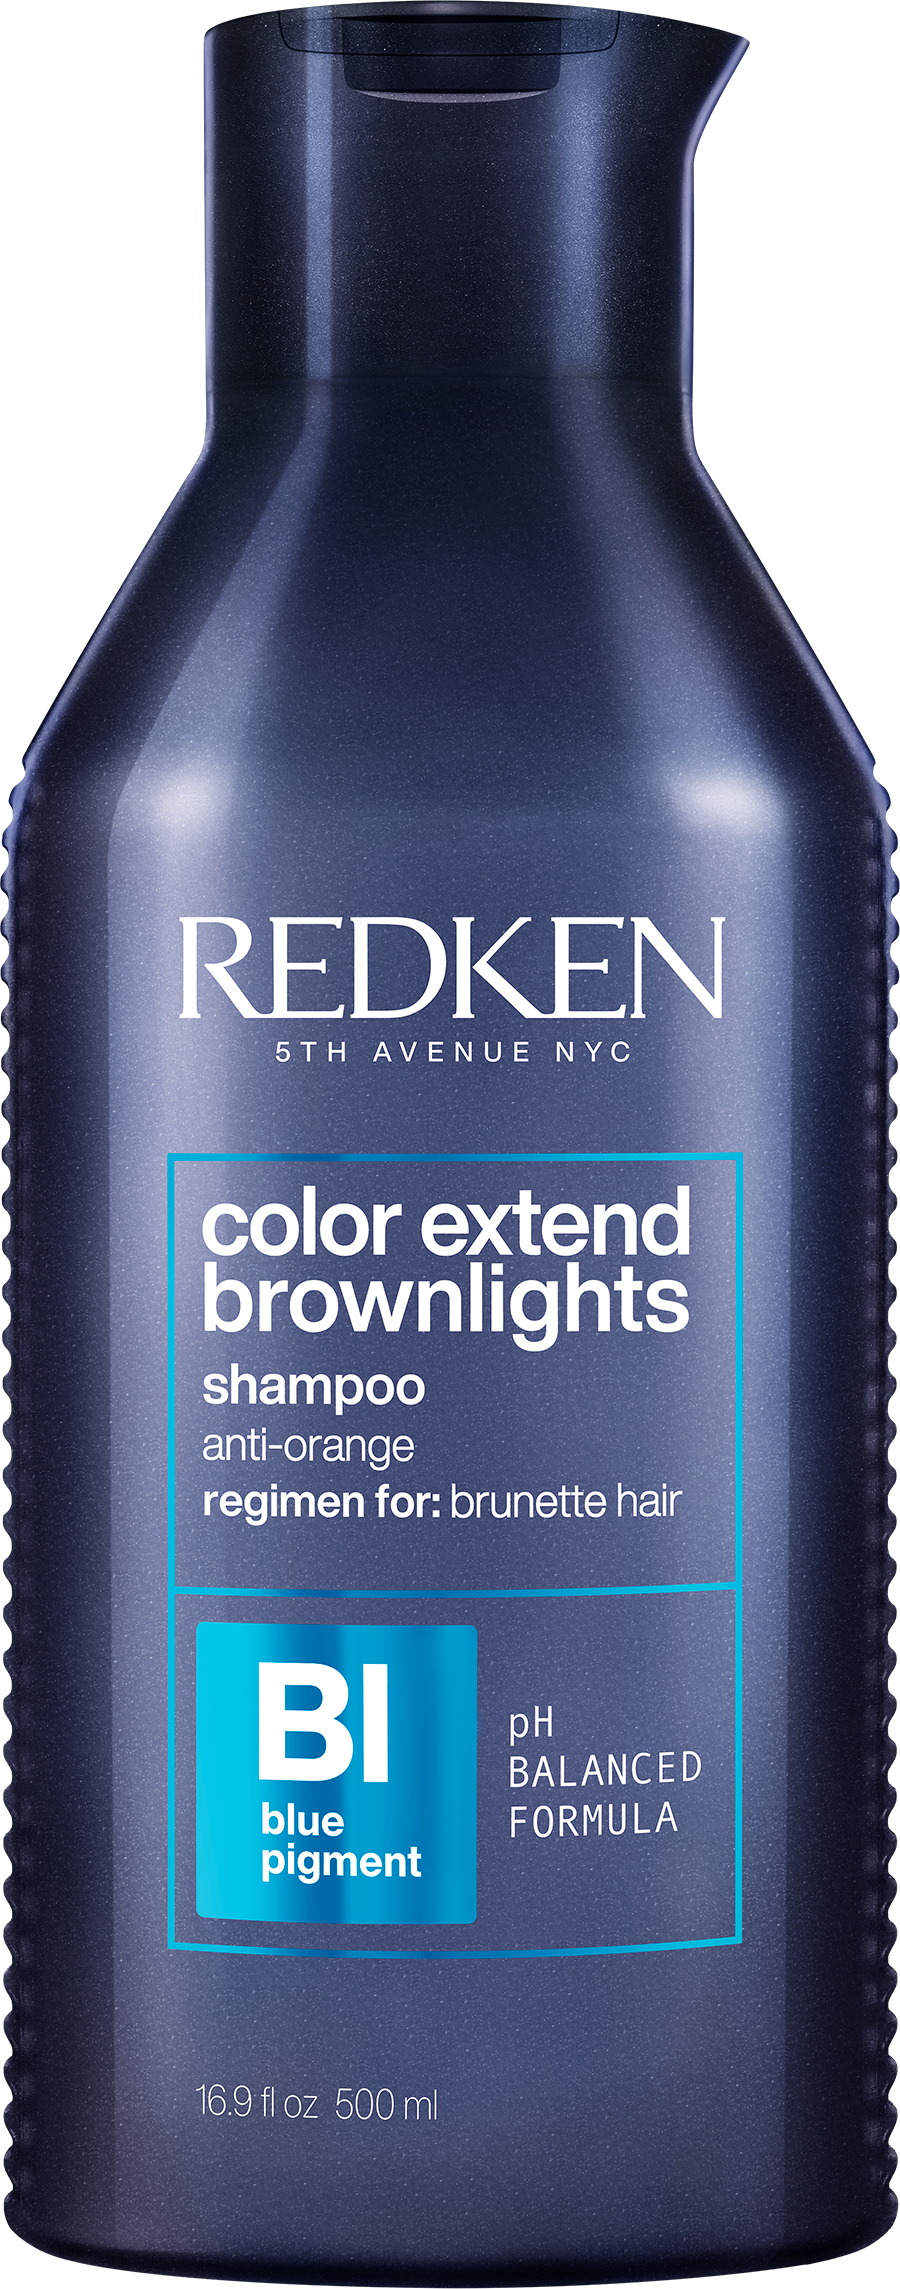 redken products